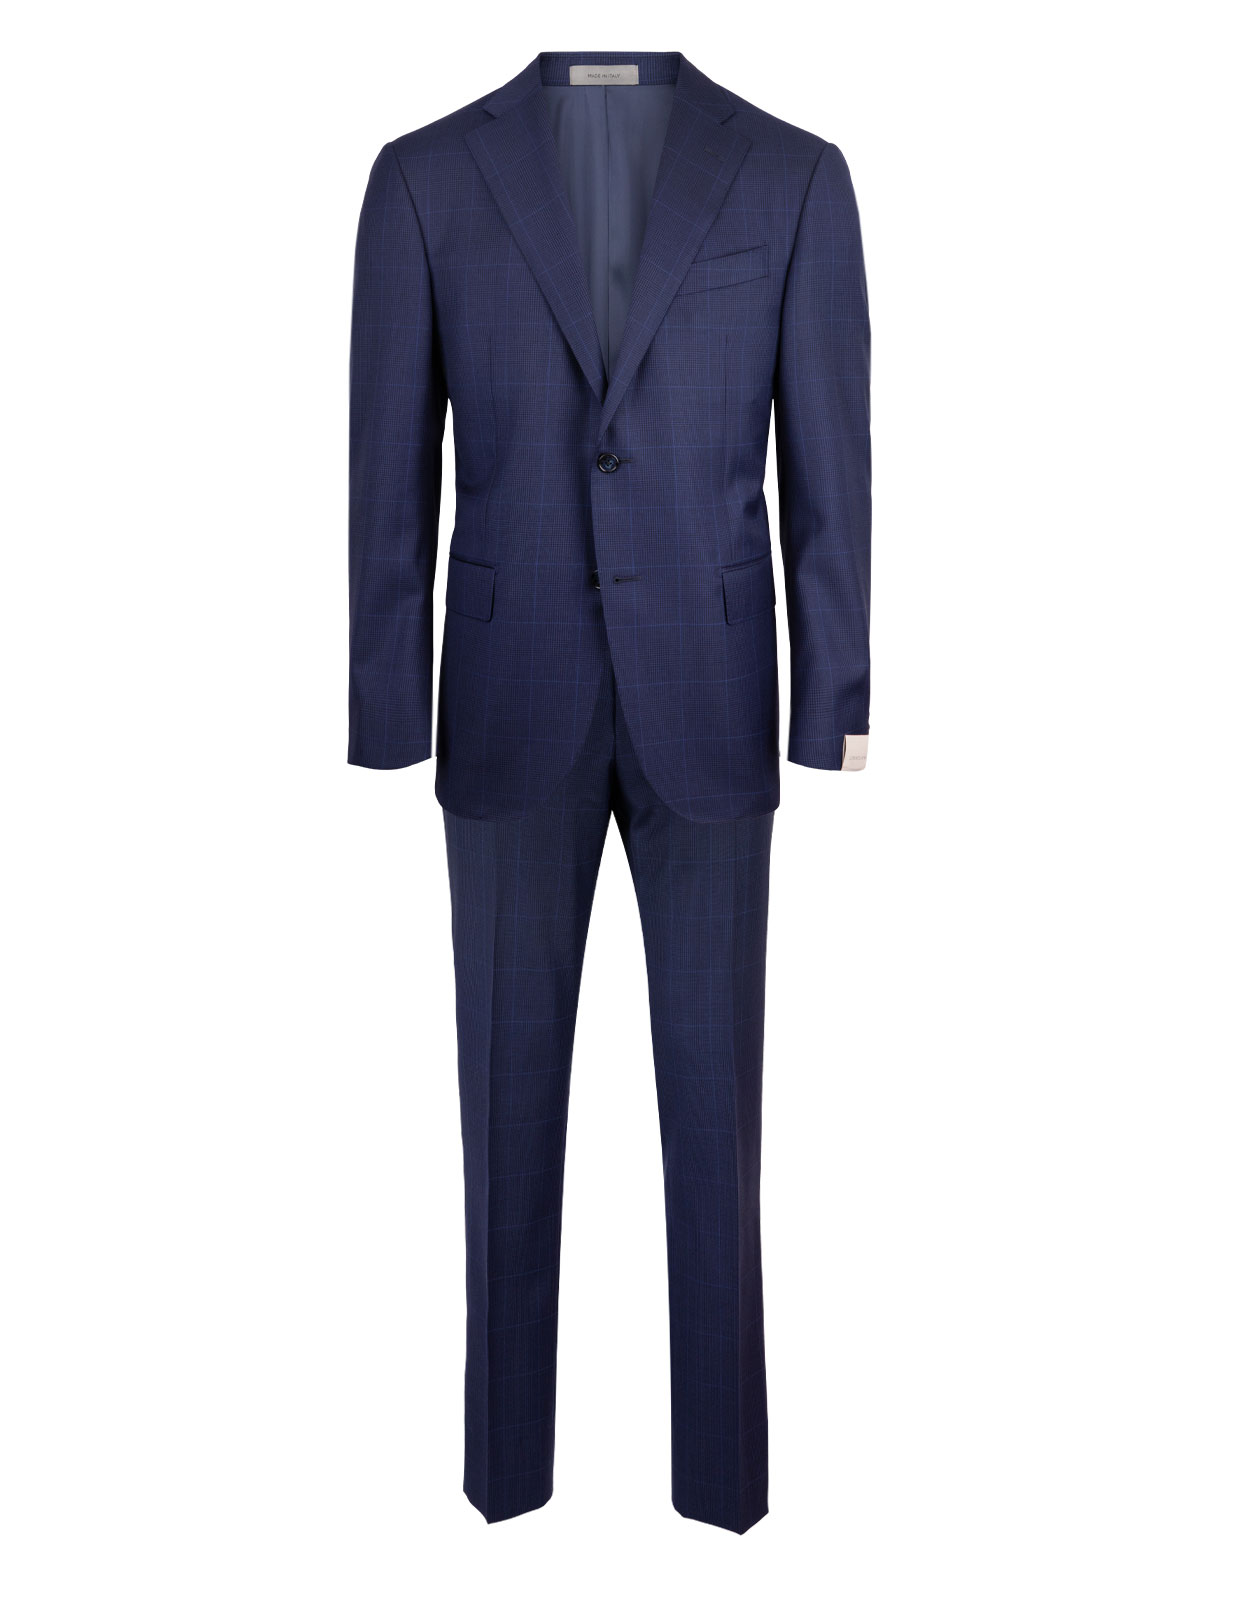 Leader 7268 Wool Suit Blue Check